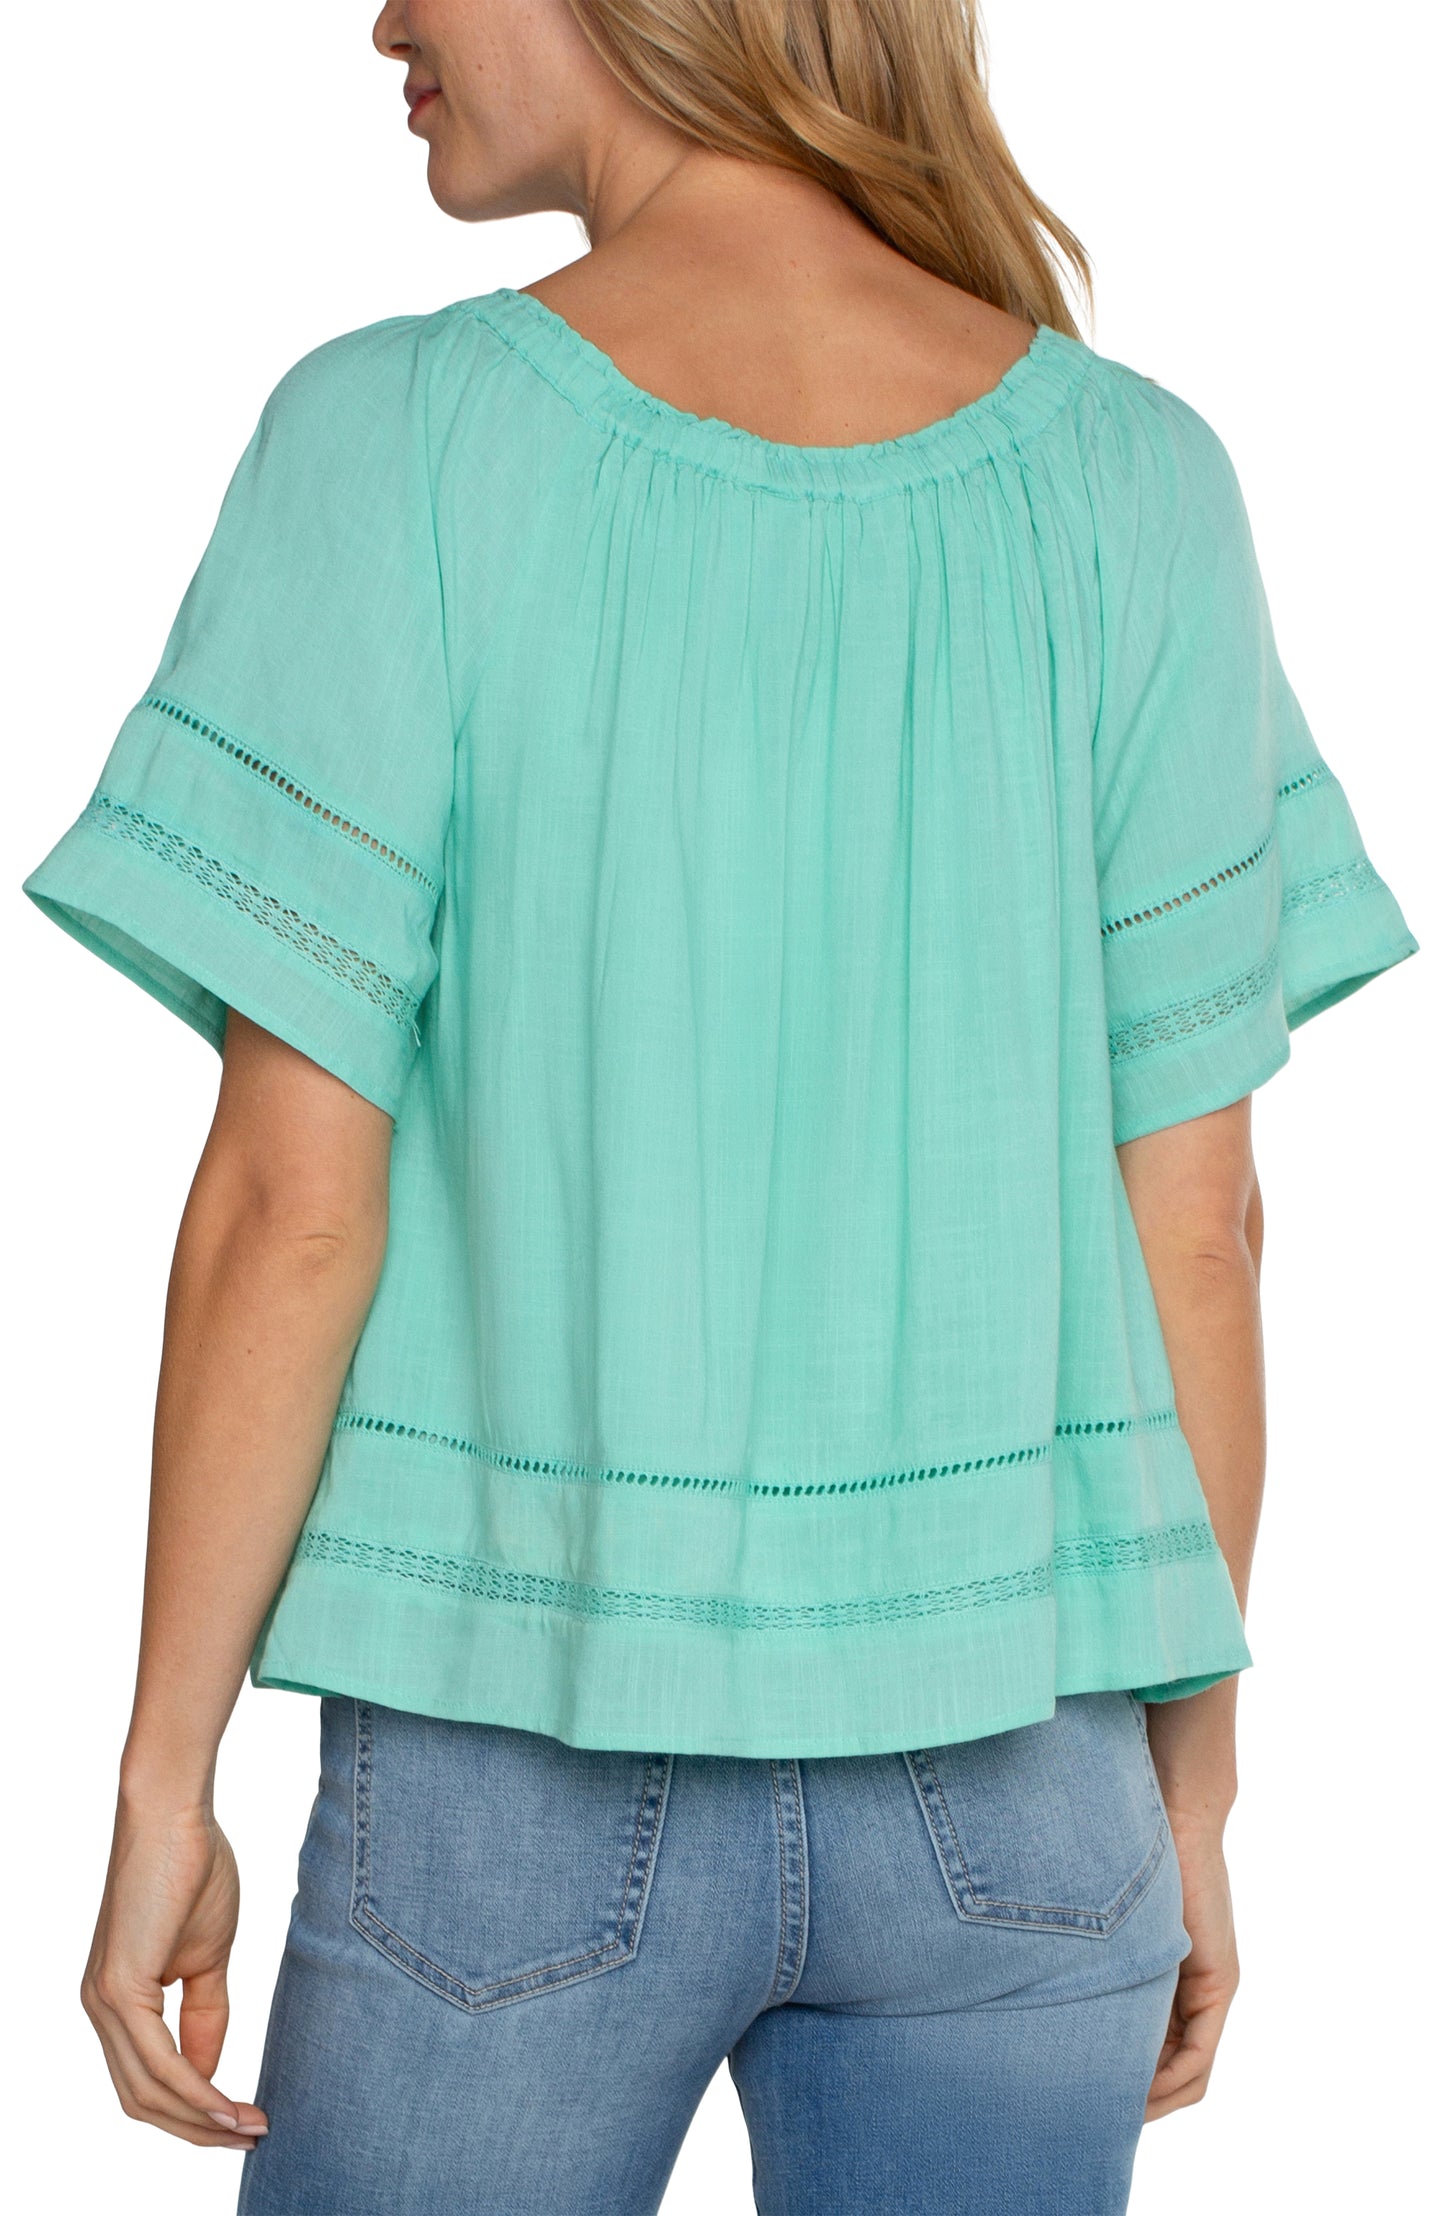 Cropped Bell Sleeve Woven Top With Lace Trim